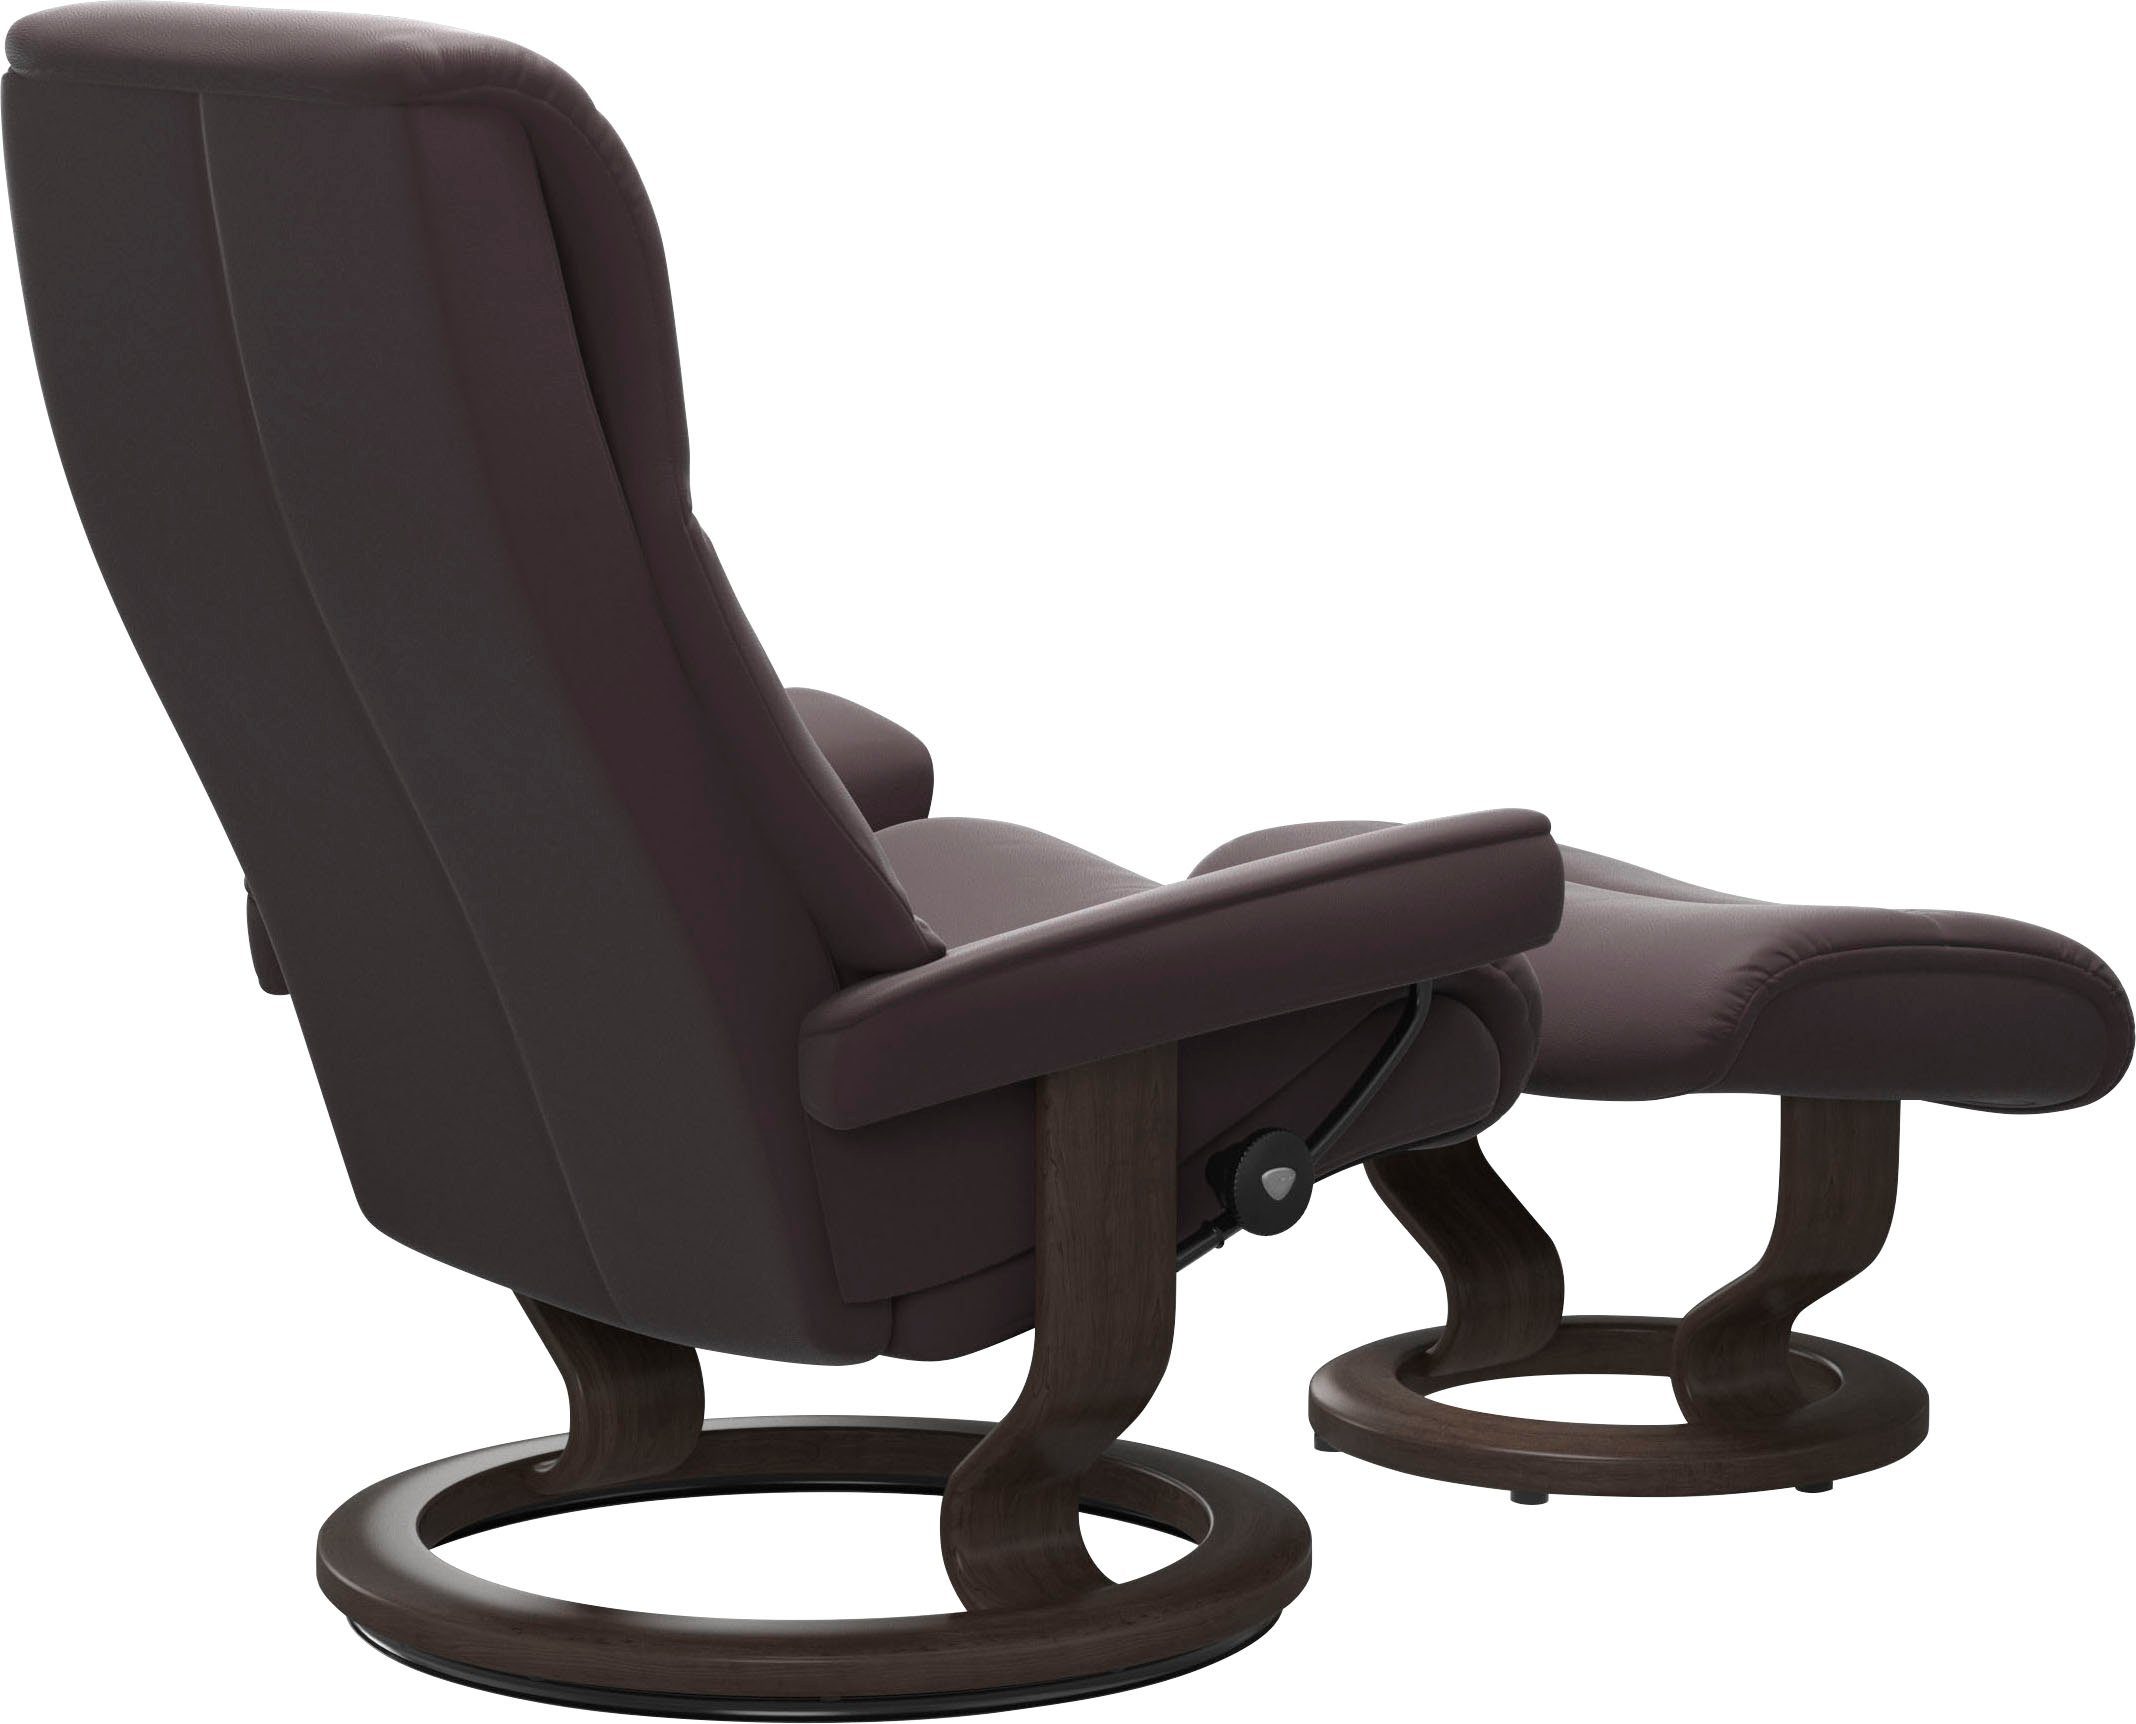 Wenge View, Relaxsessel Stressless® Base, mit Classic M,Gestell Größe